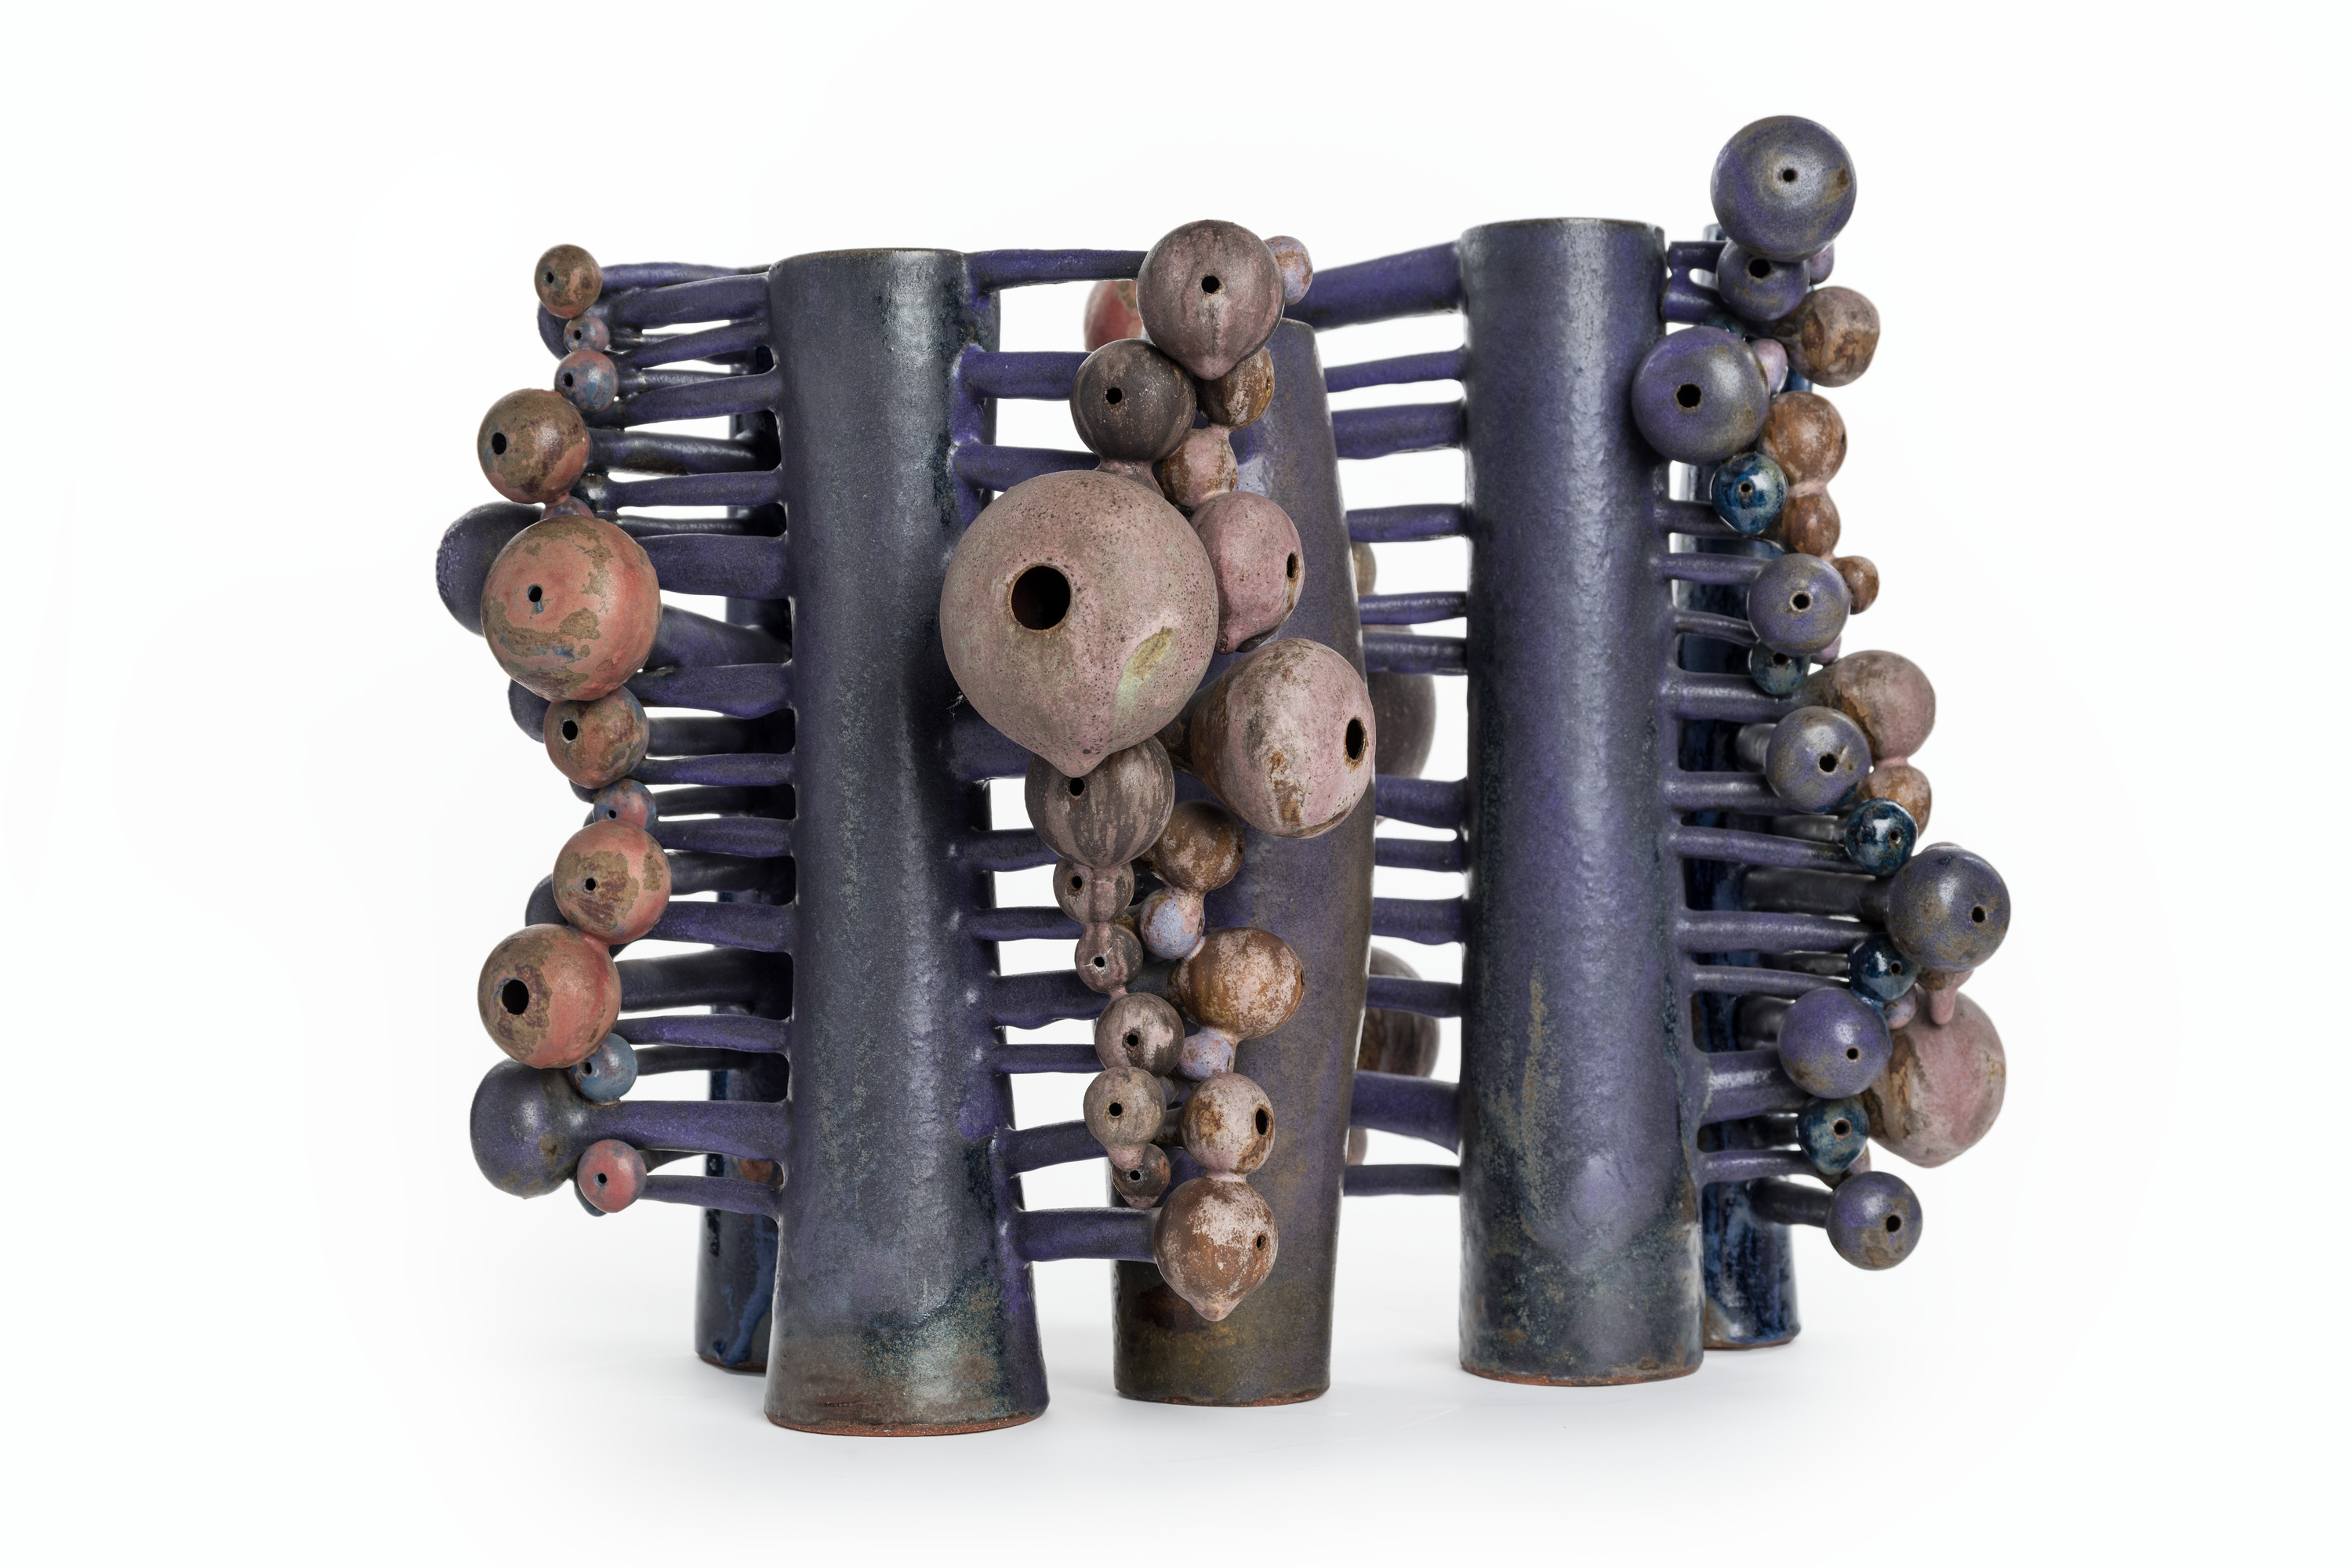 Stoneware sculpture titled Space Lattice by Beate Kuhn